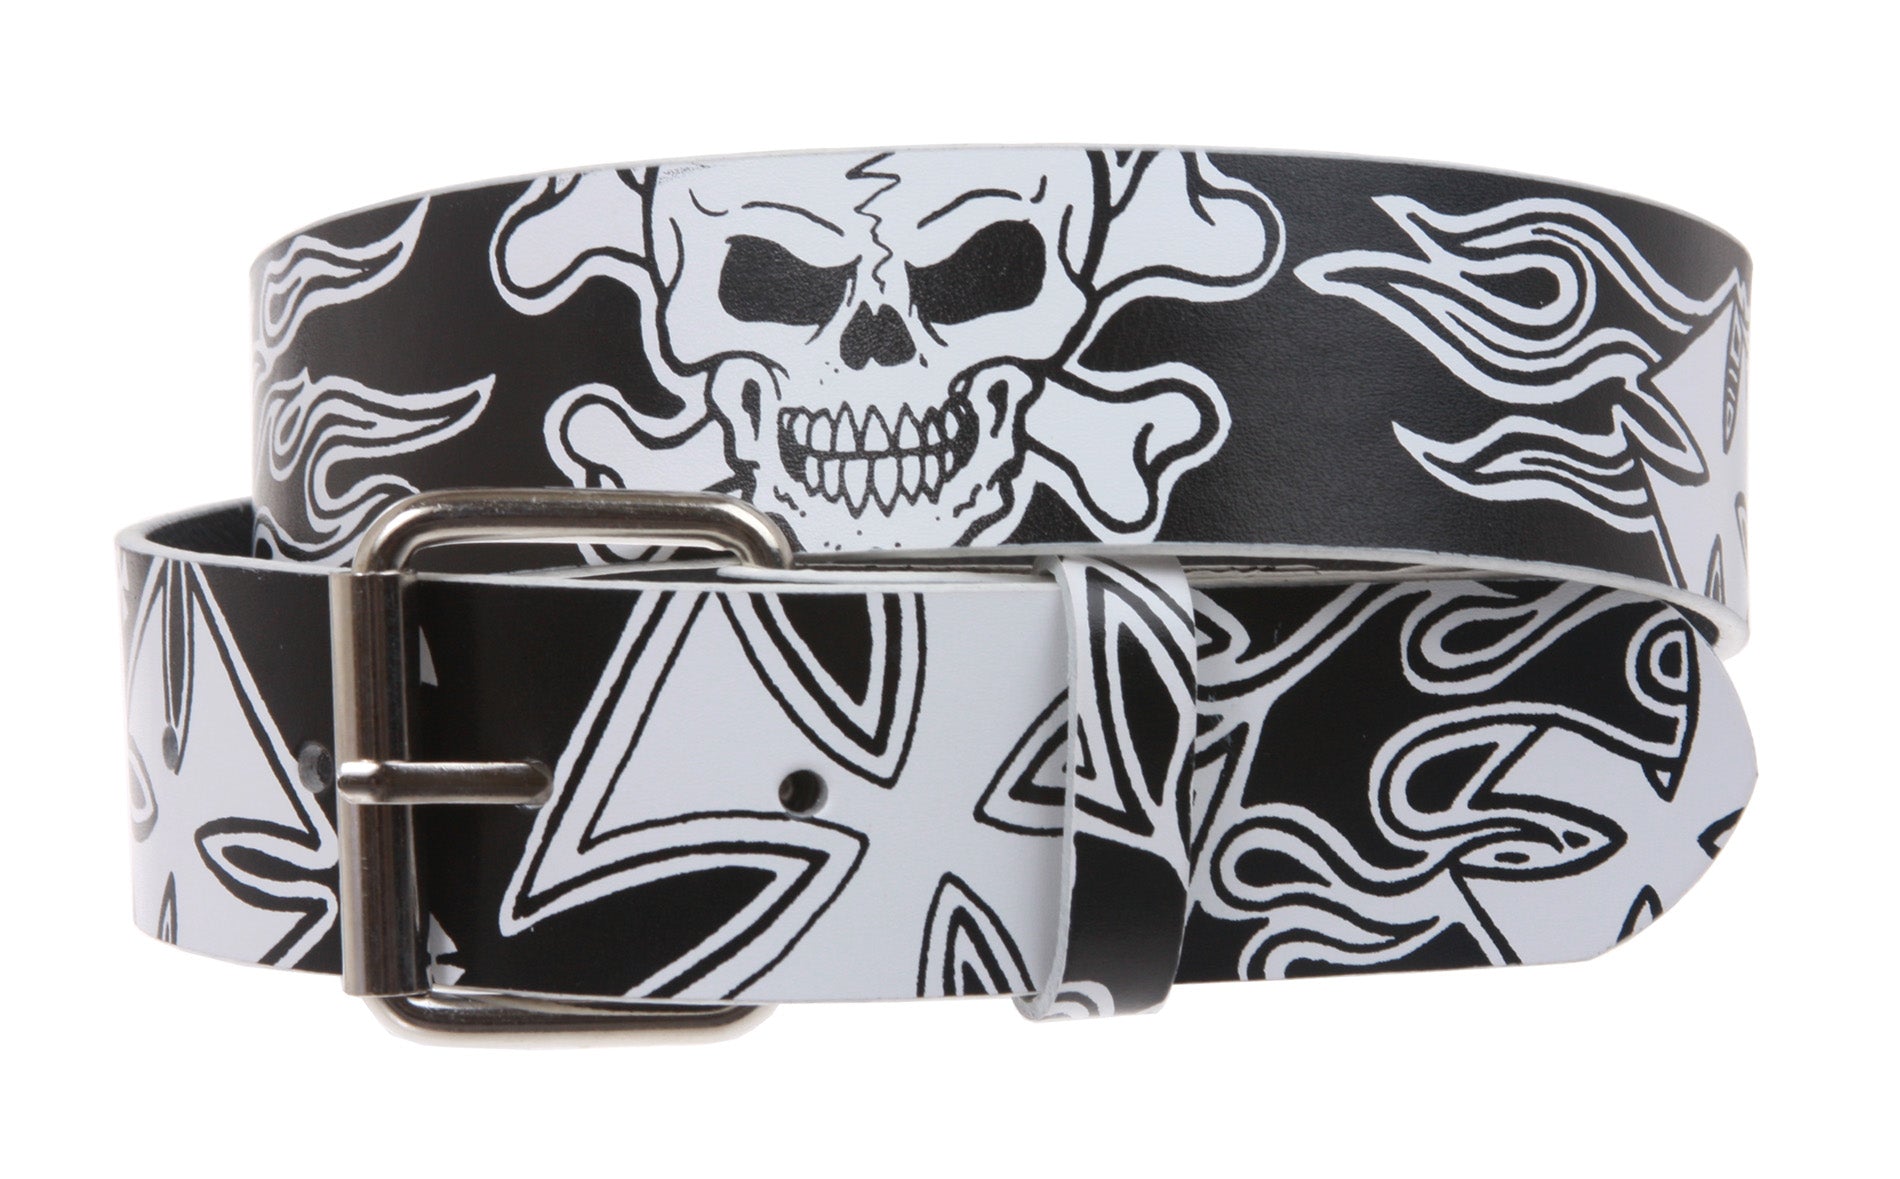 Snap On Skull and Iron Cross Tattoo Ink Fashion Bonded Leather Belt